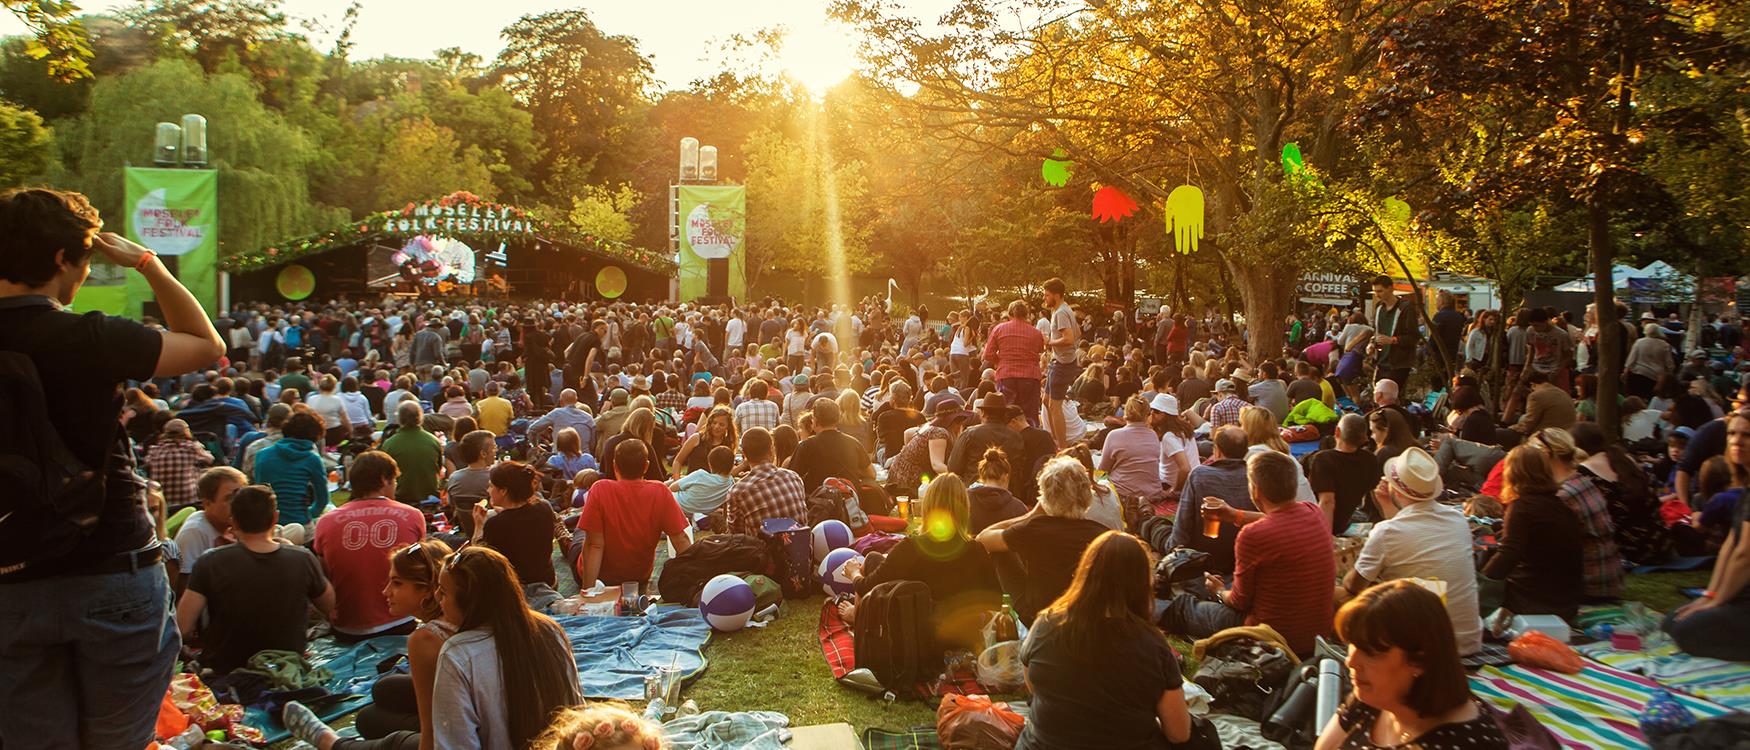 A summer of fun... See what's on (this image: Moseley Folk & Arts Festival)